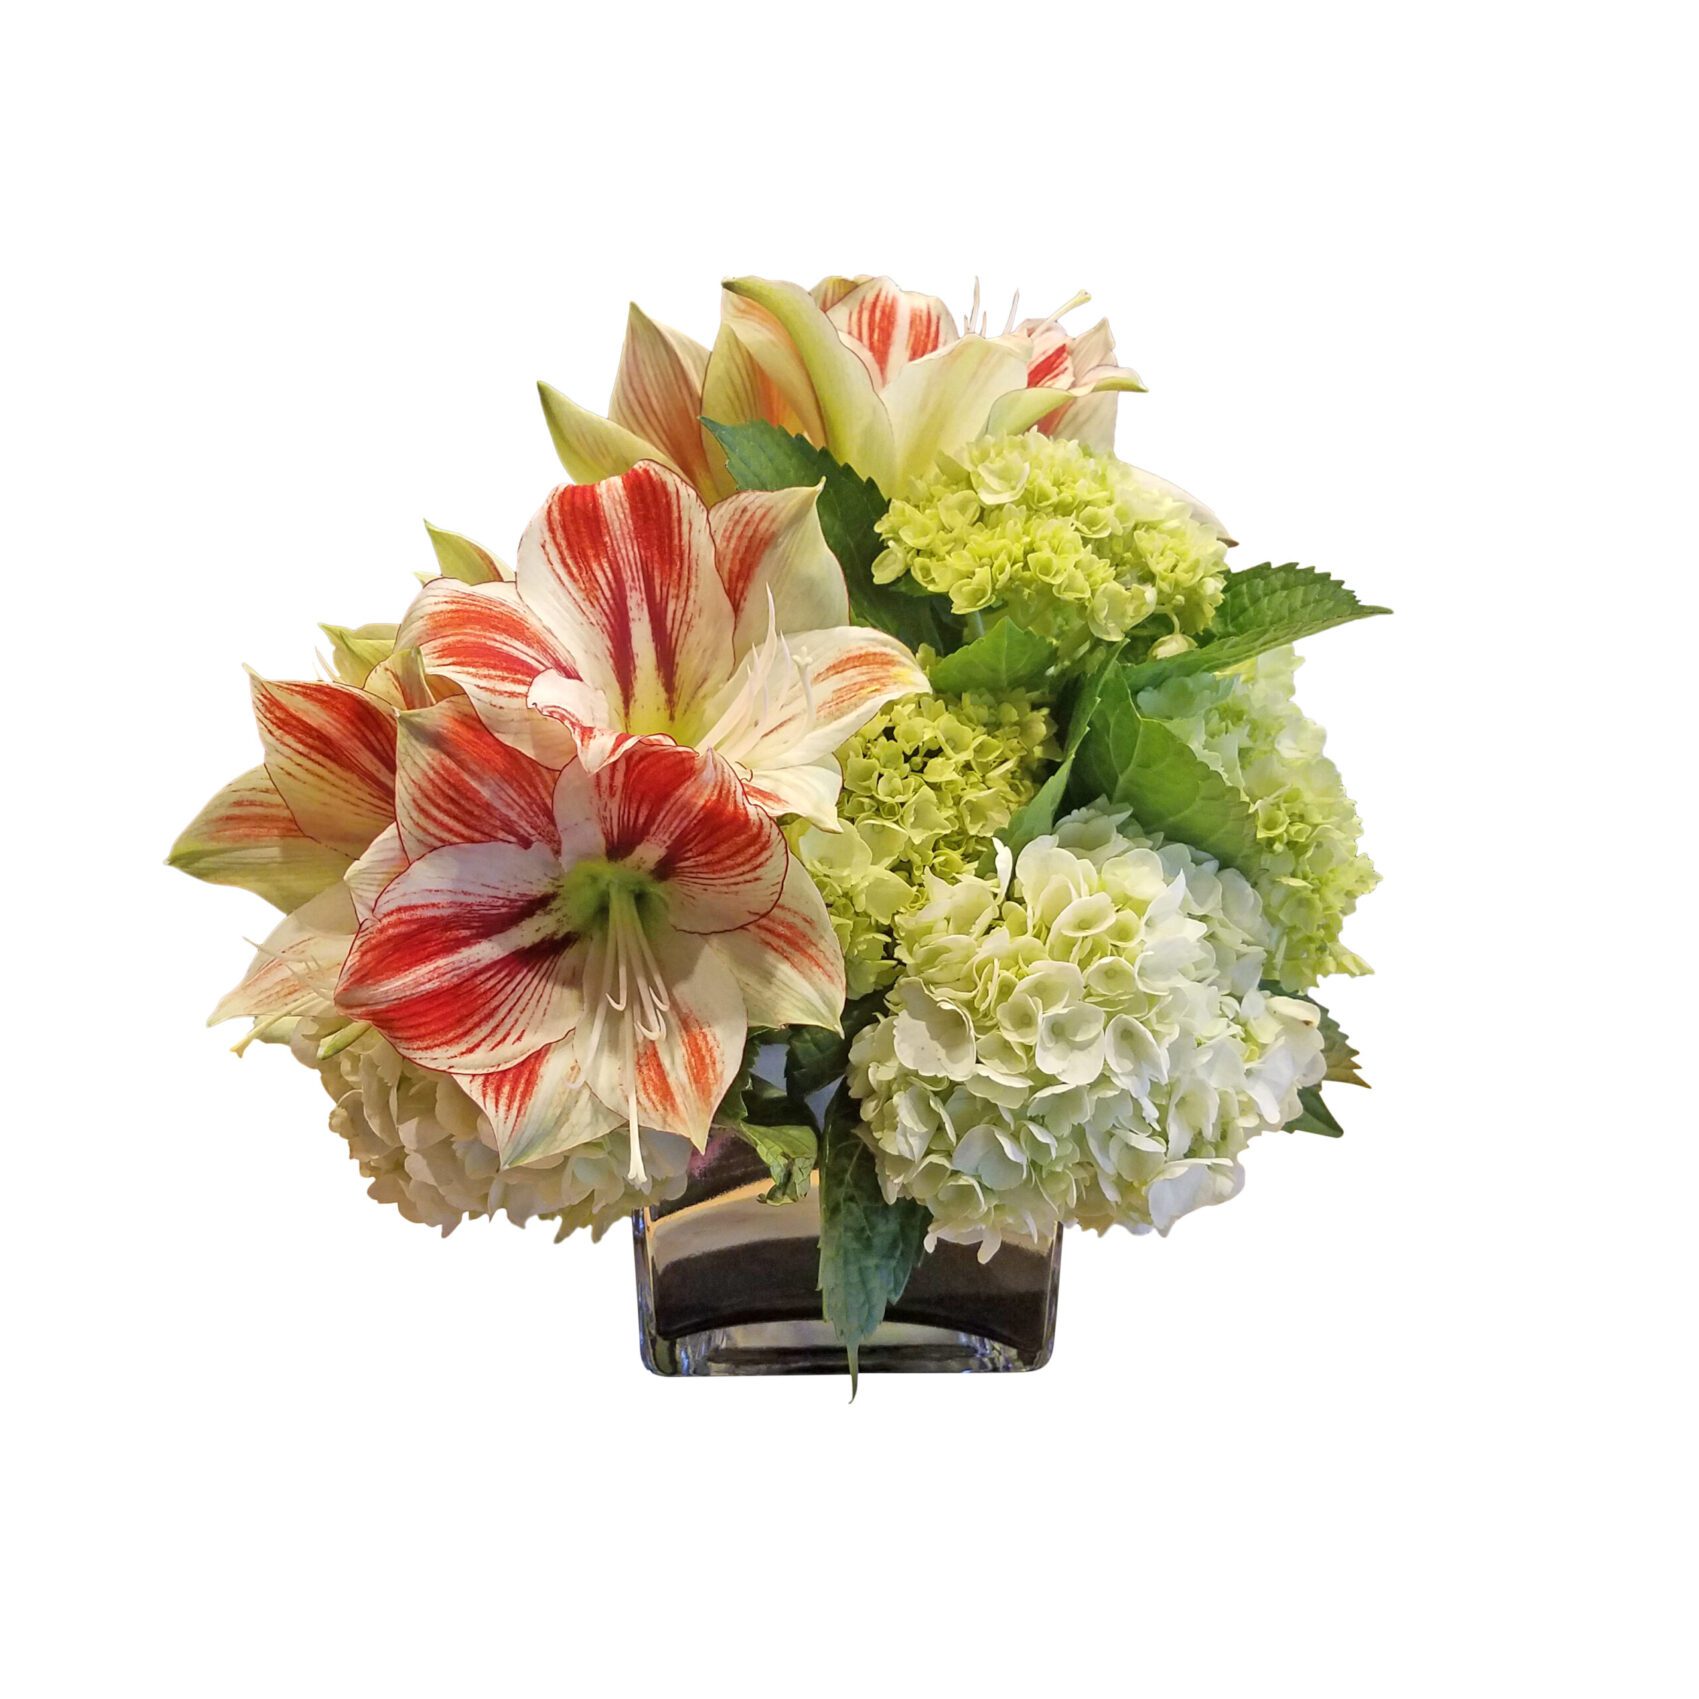 Amaryllis and Hydrangea scaled Green Hydrangea and Red Striped Amaryllis: Clear Glass Cubed Vase with White and